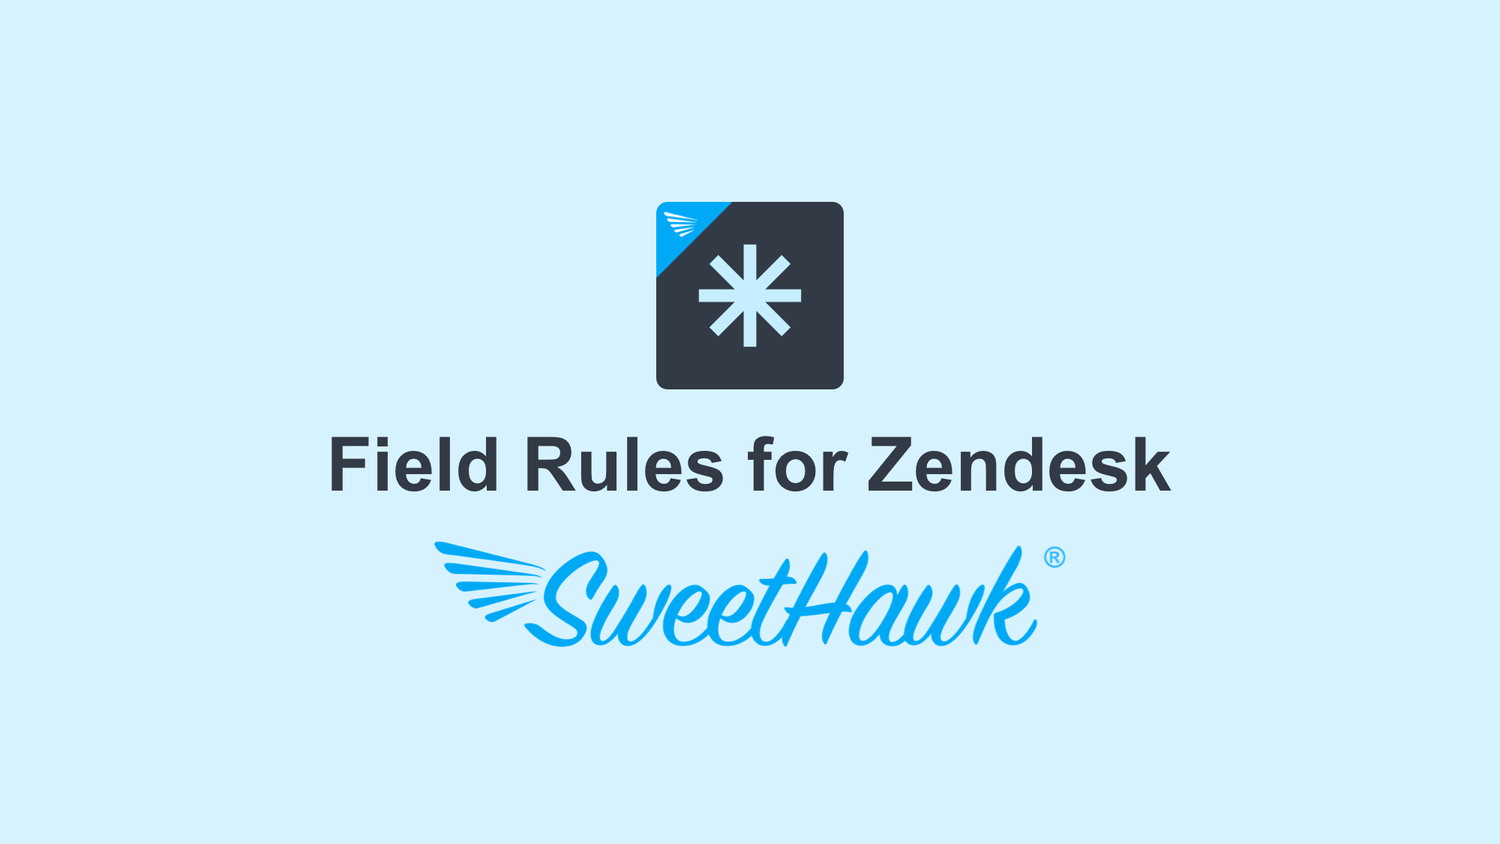 SweetHawk - Zendesk apps that give you superpowers! (sponsor)